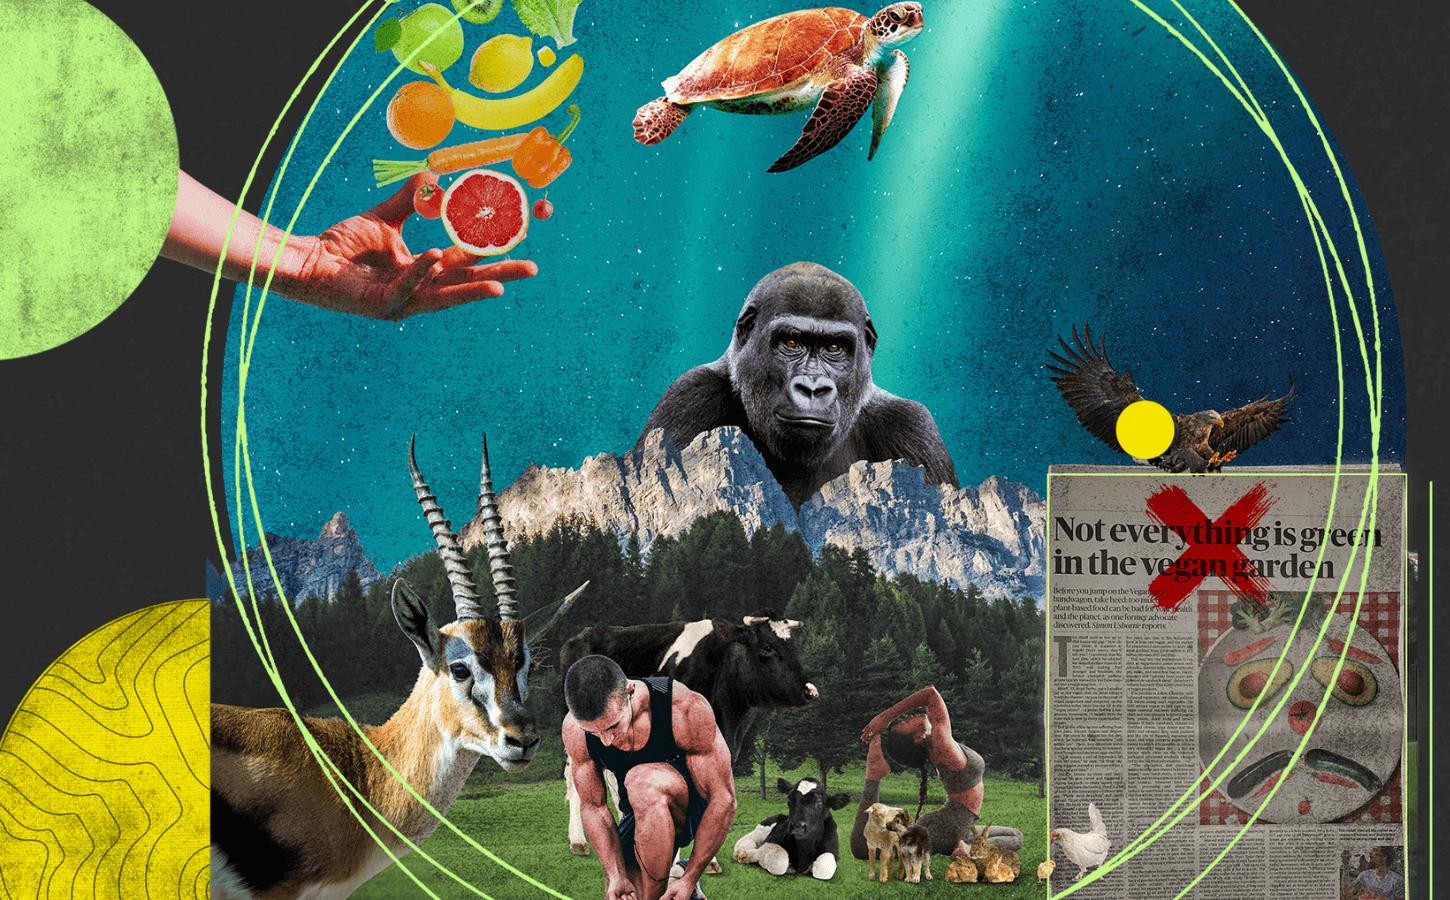 Vegan art featuring animals, plant-based food, nature, and a newspaper